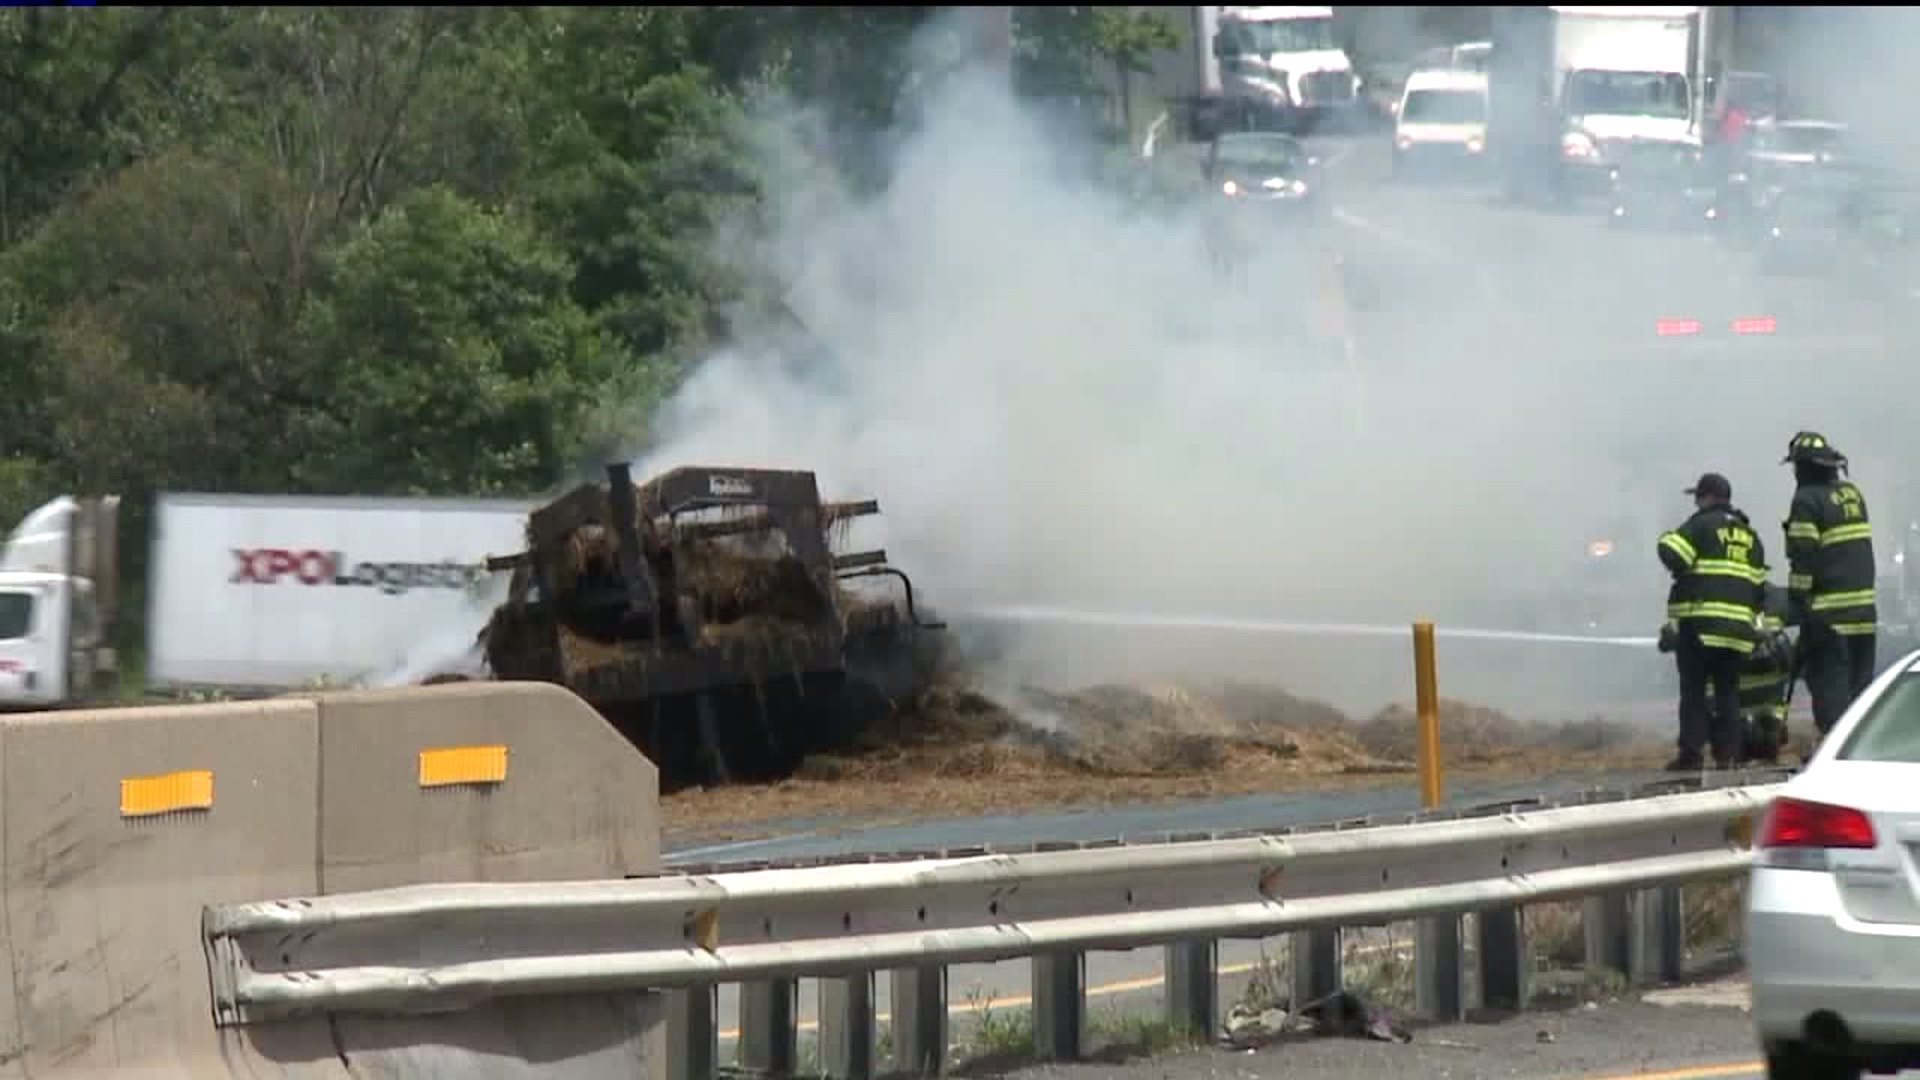 Truck Hauling Hay Catches Fire on Interstate 81